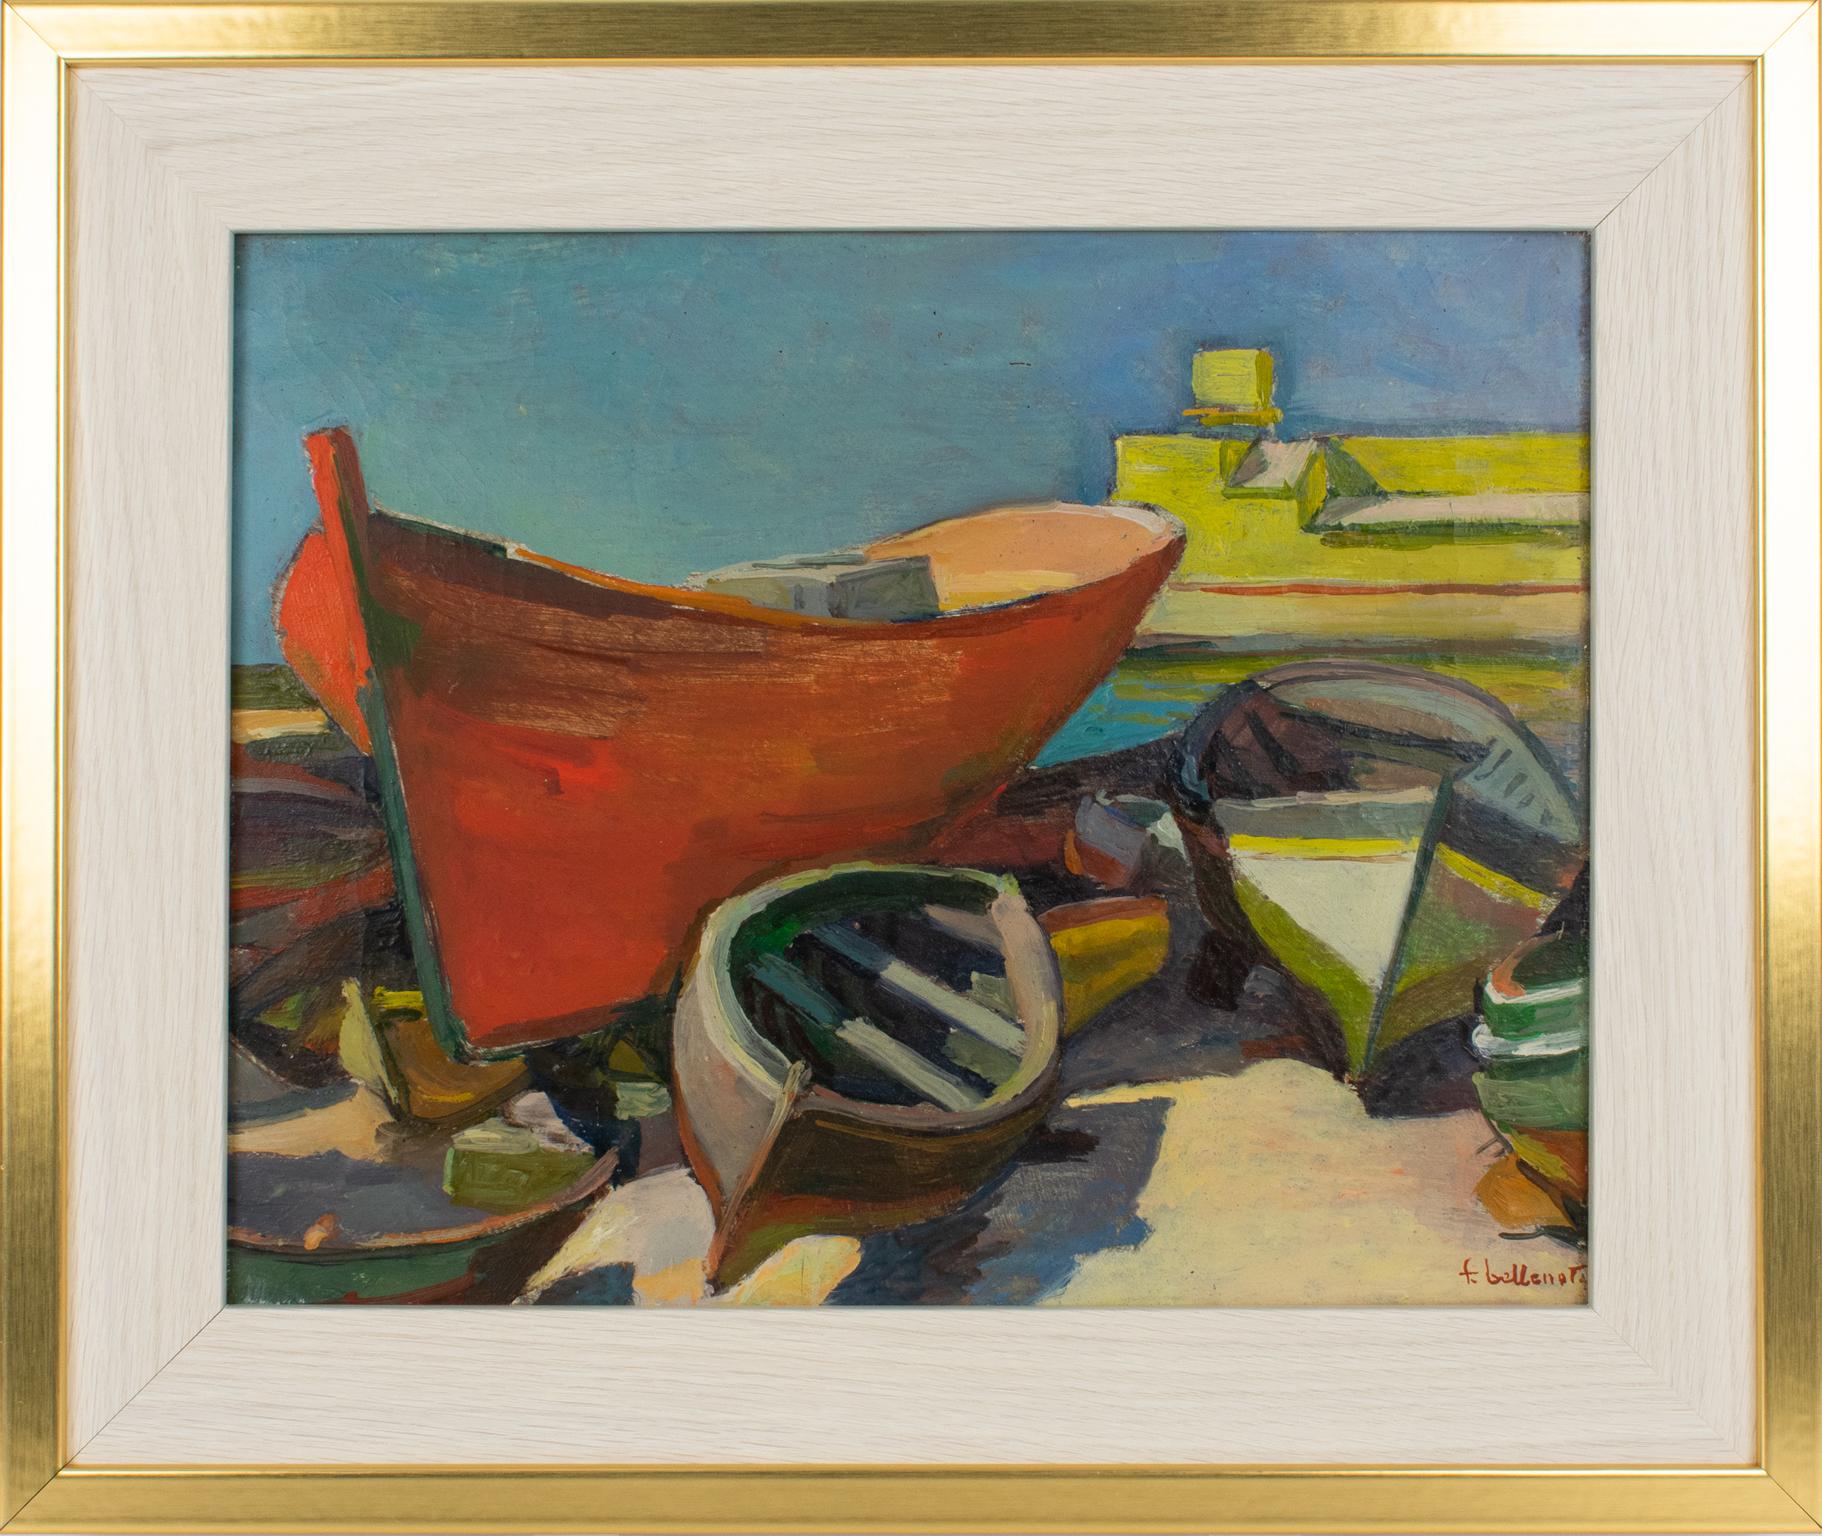 This superb oil on canvas painting was created by Felix Eugene Bellenot (1892 - 1963). This vibrant and passionate composition represents the port of Sainte Maxime in France within the foreground of the famous fishing boats typical of the French